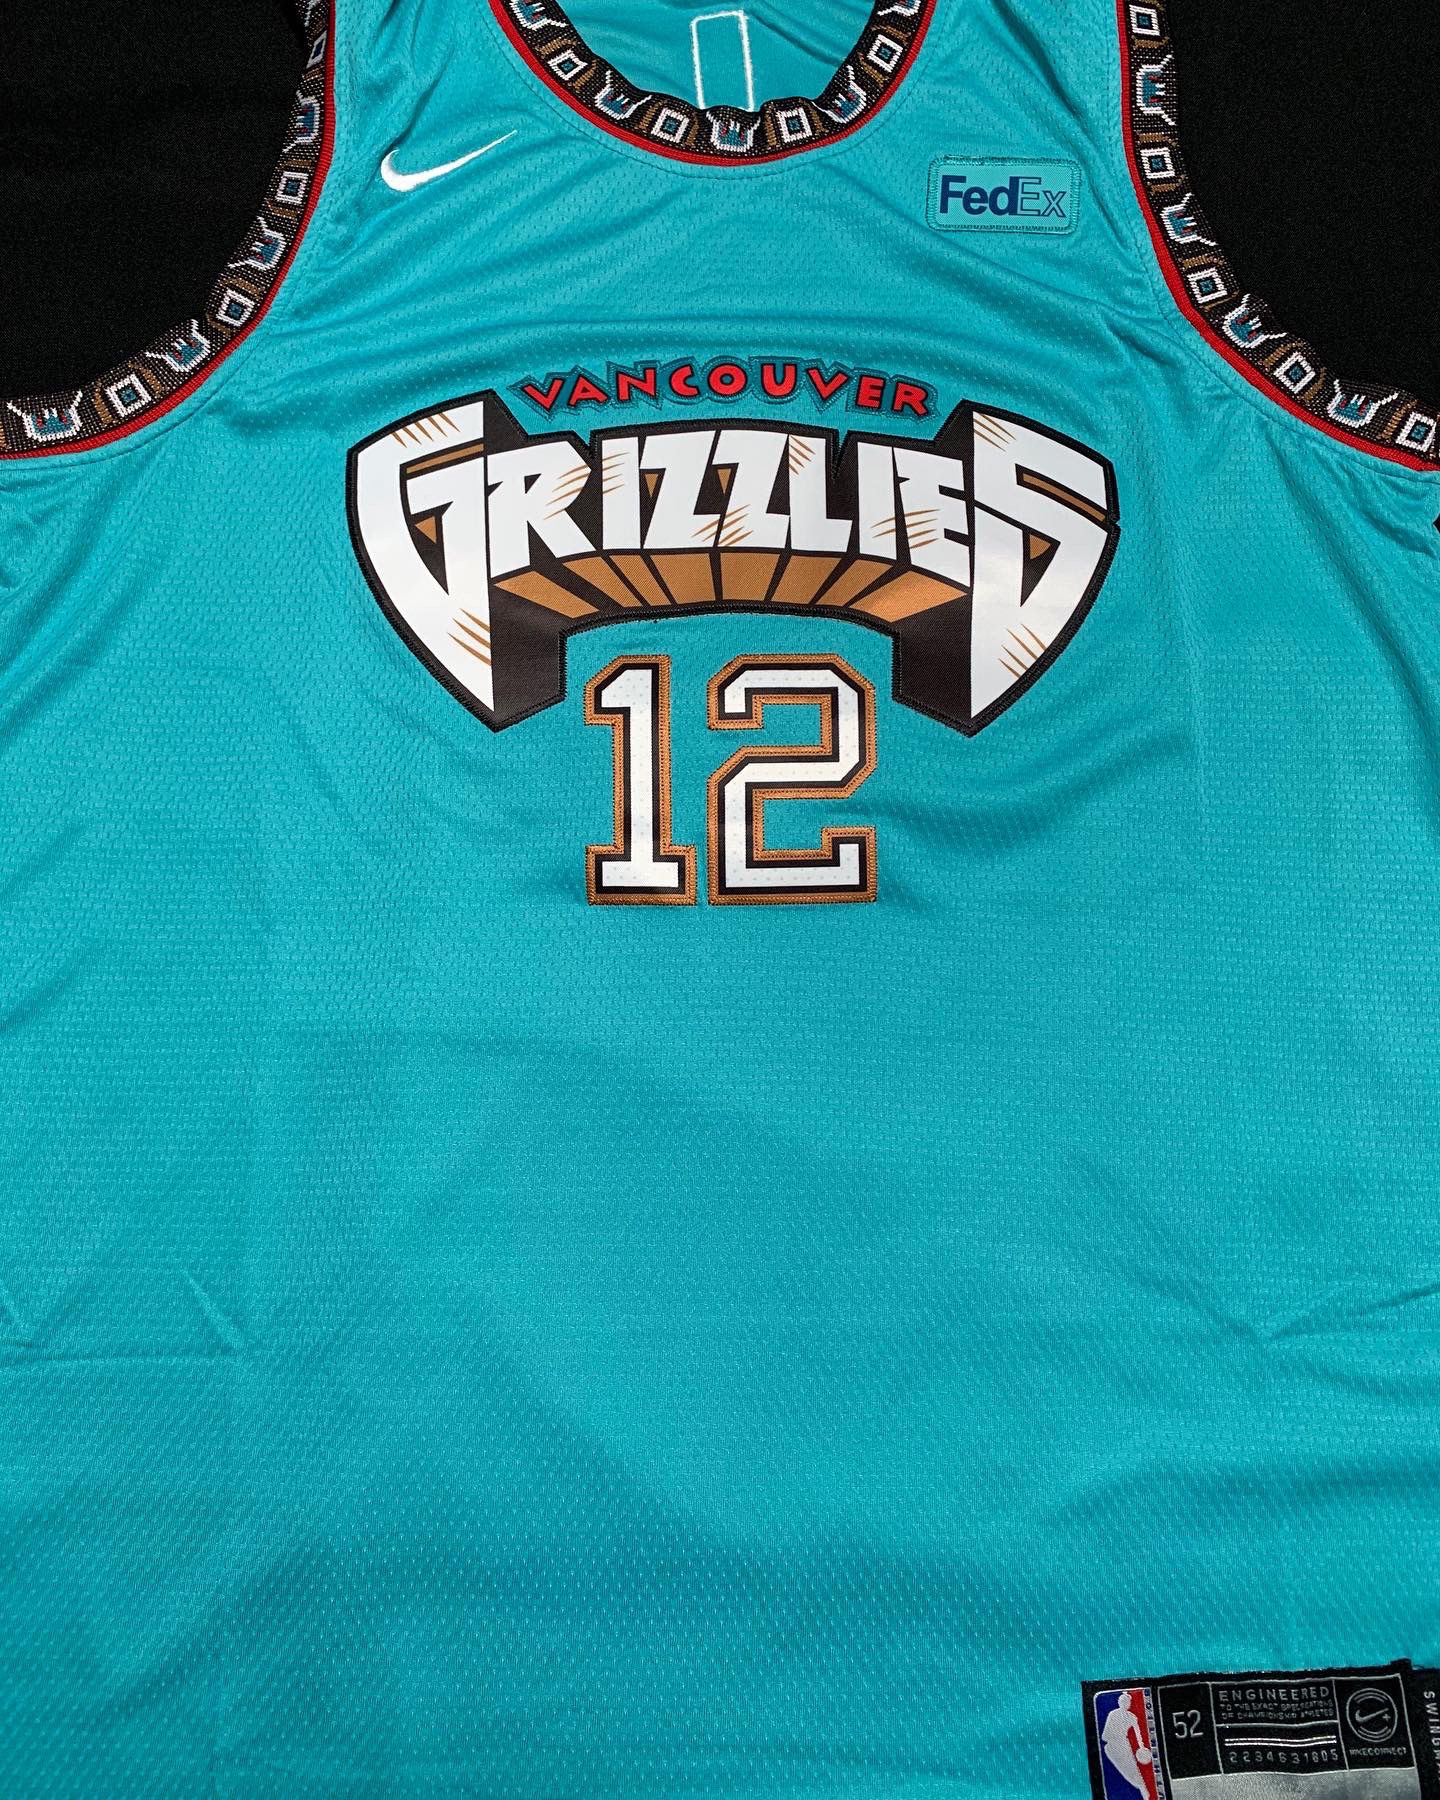 New Stitched Never Worn Memphis Grizzles Ja morant Jersey Size